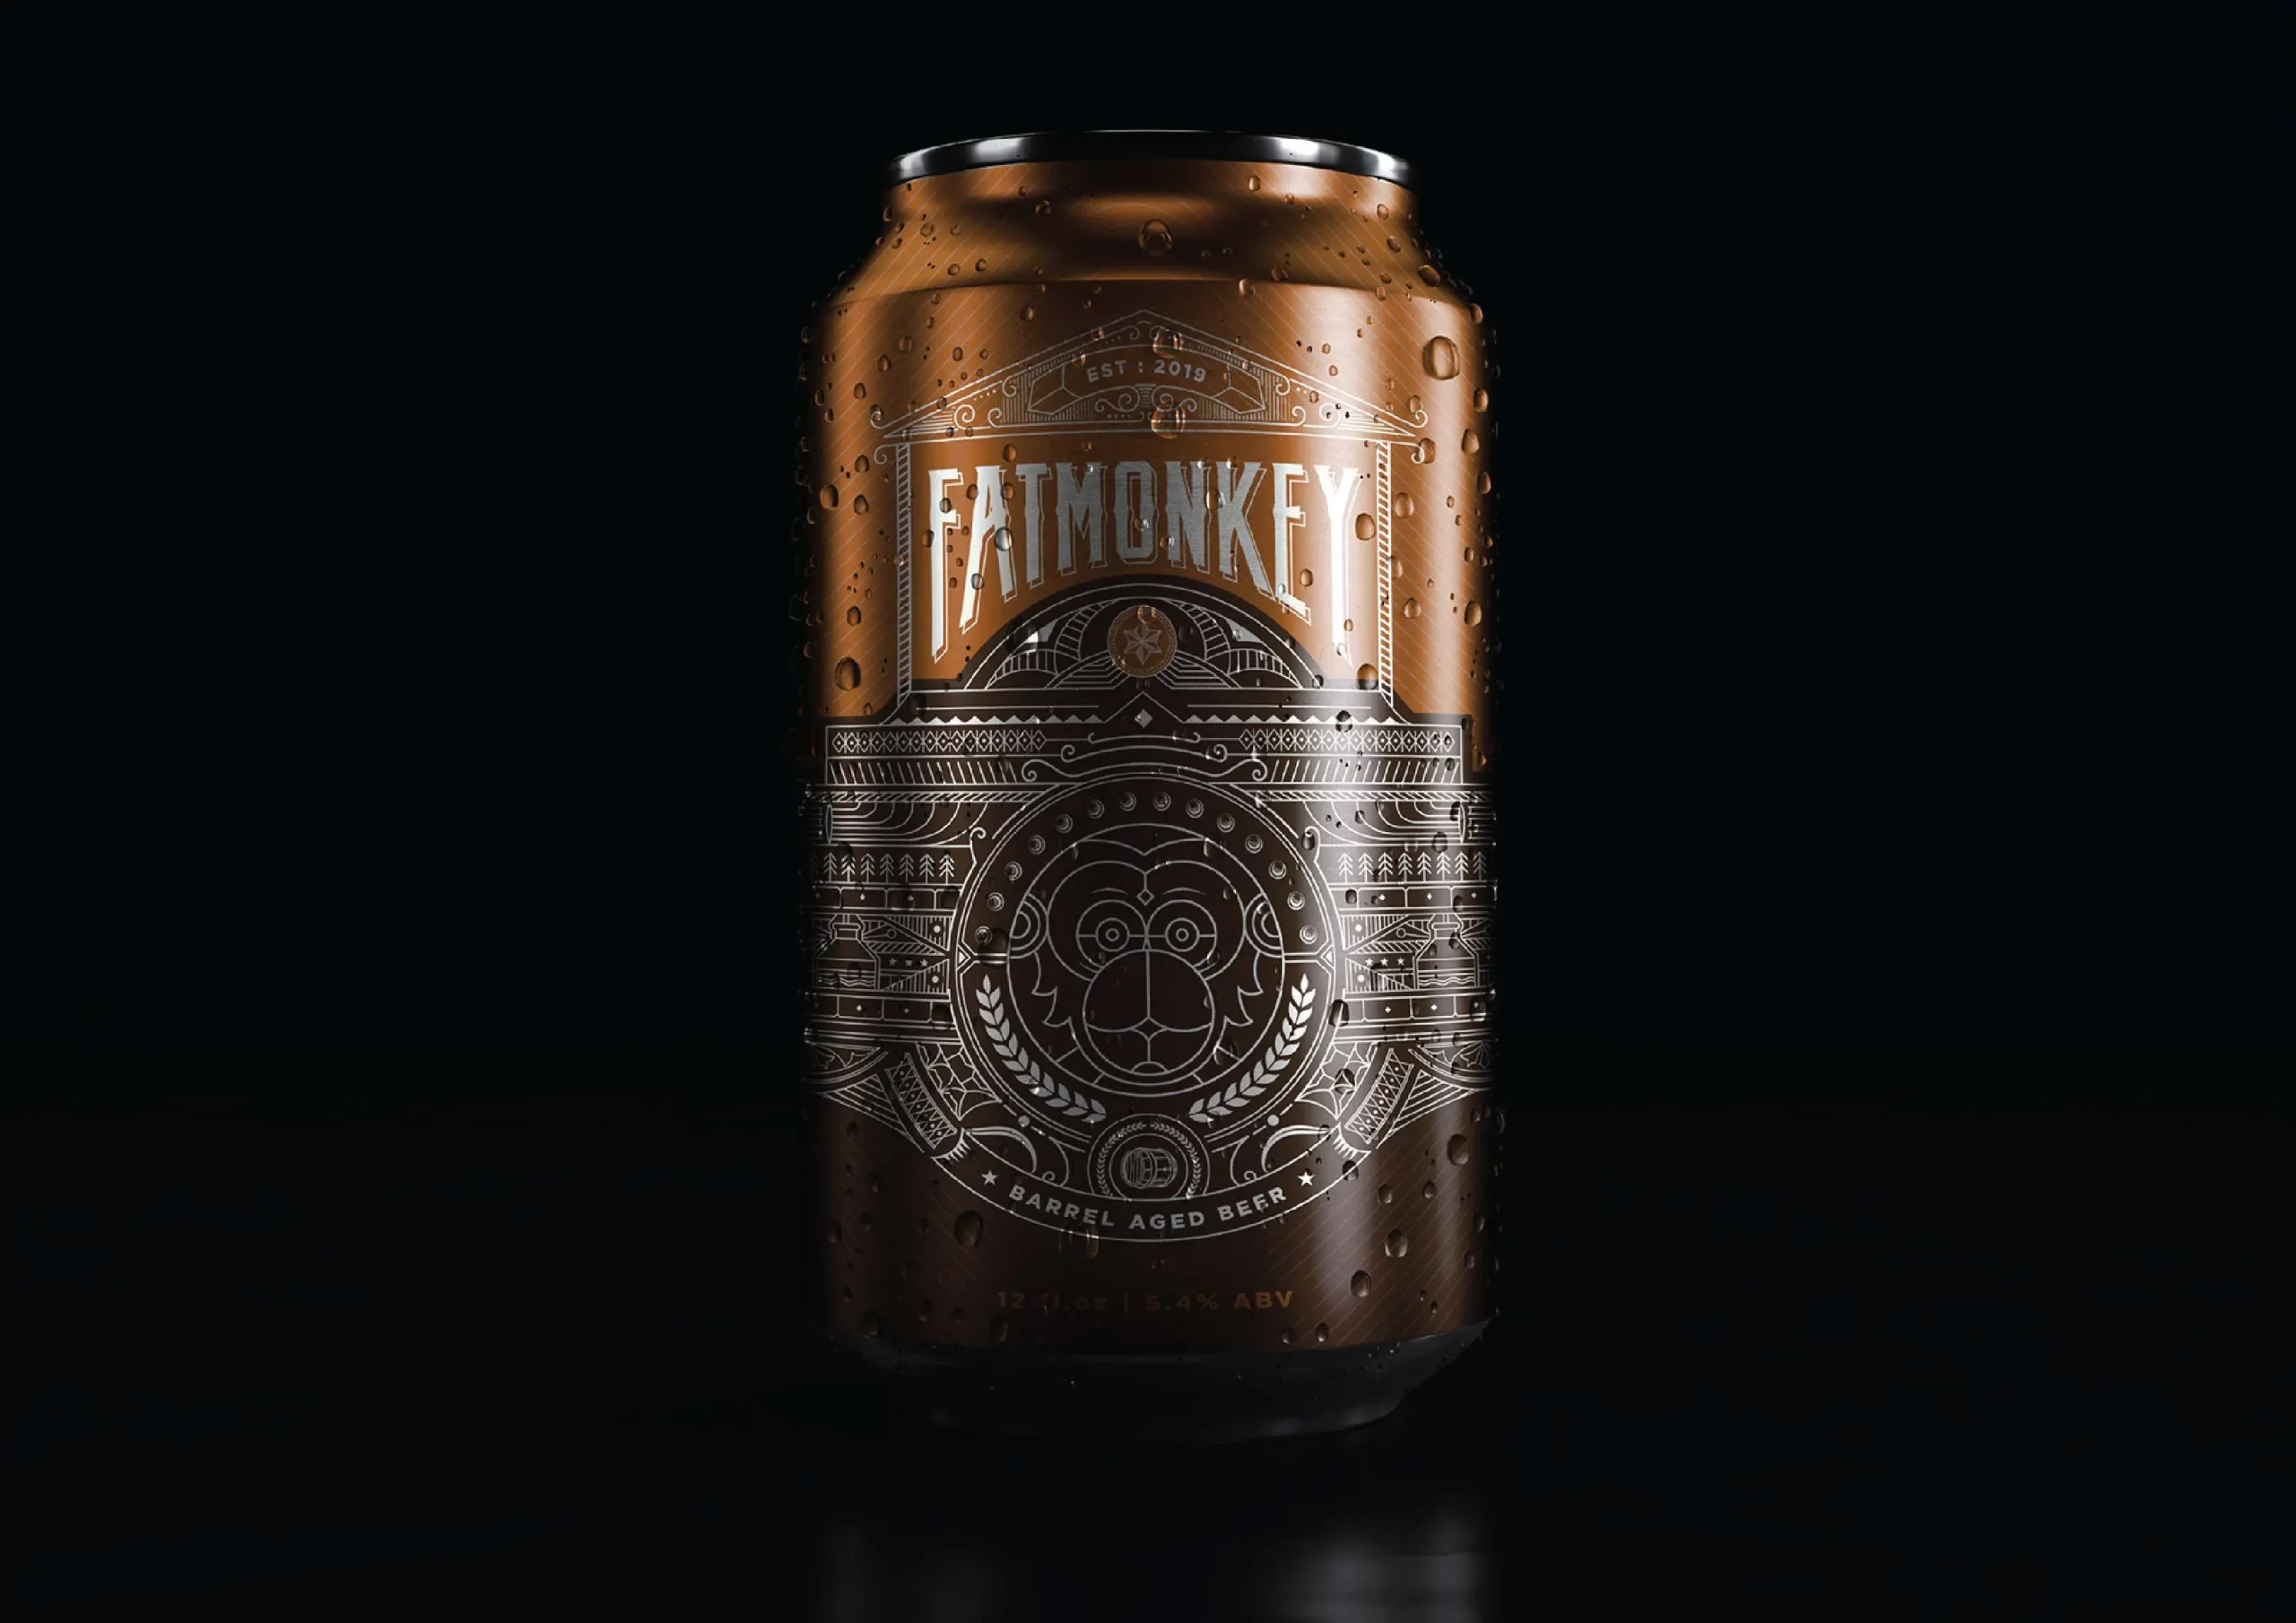 An image of a beer can with a black background.